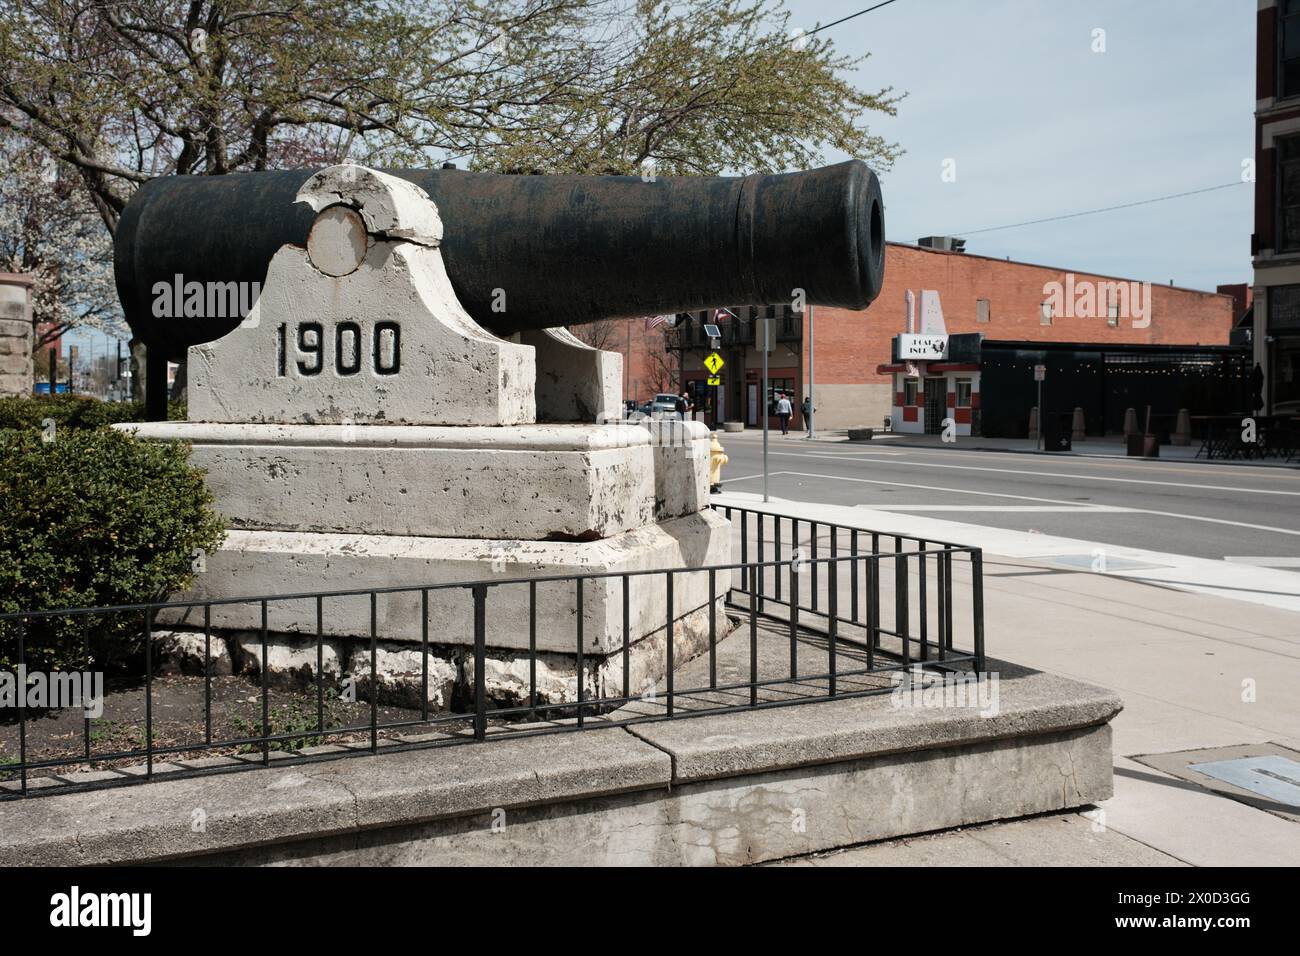 Antique cannon on display in the town square in Lima Ohio USA Stock Photo